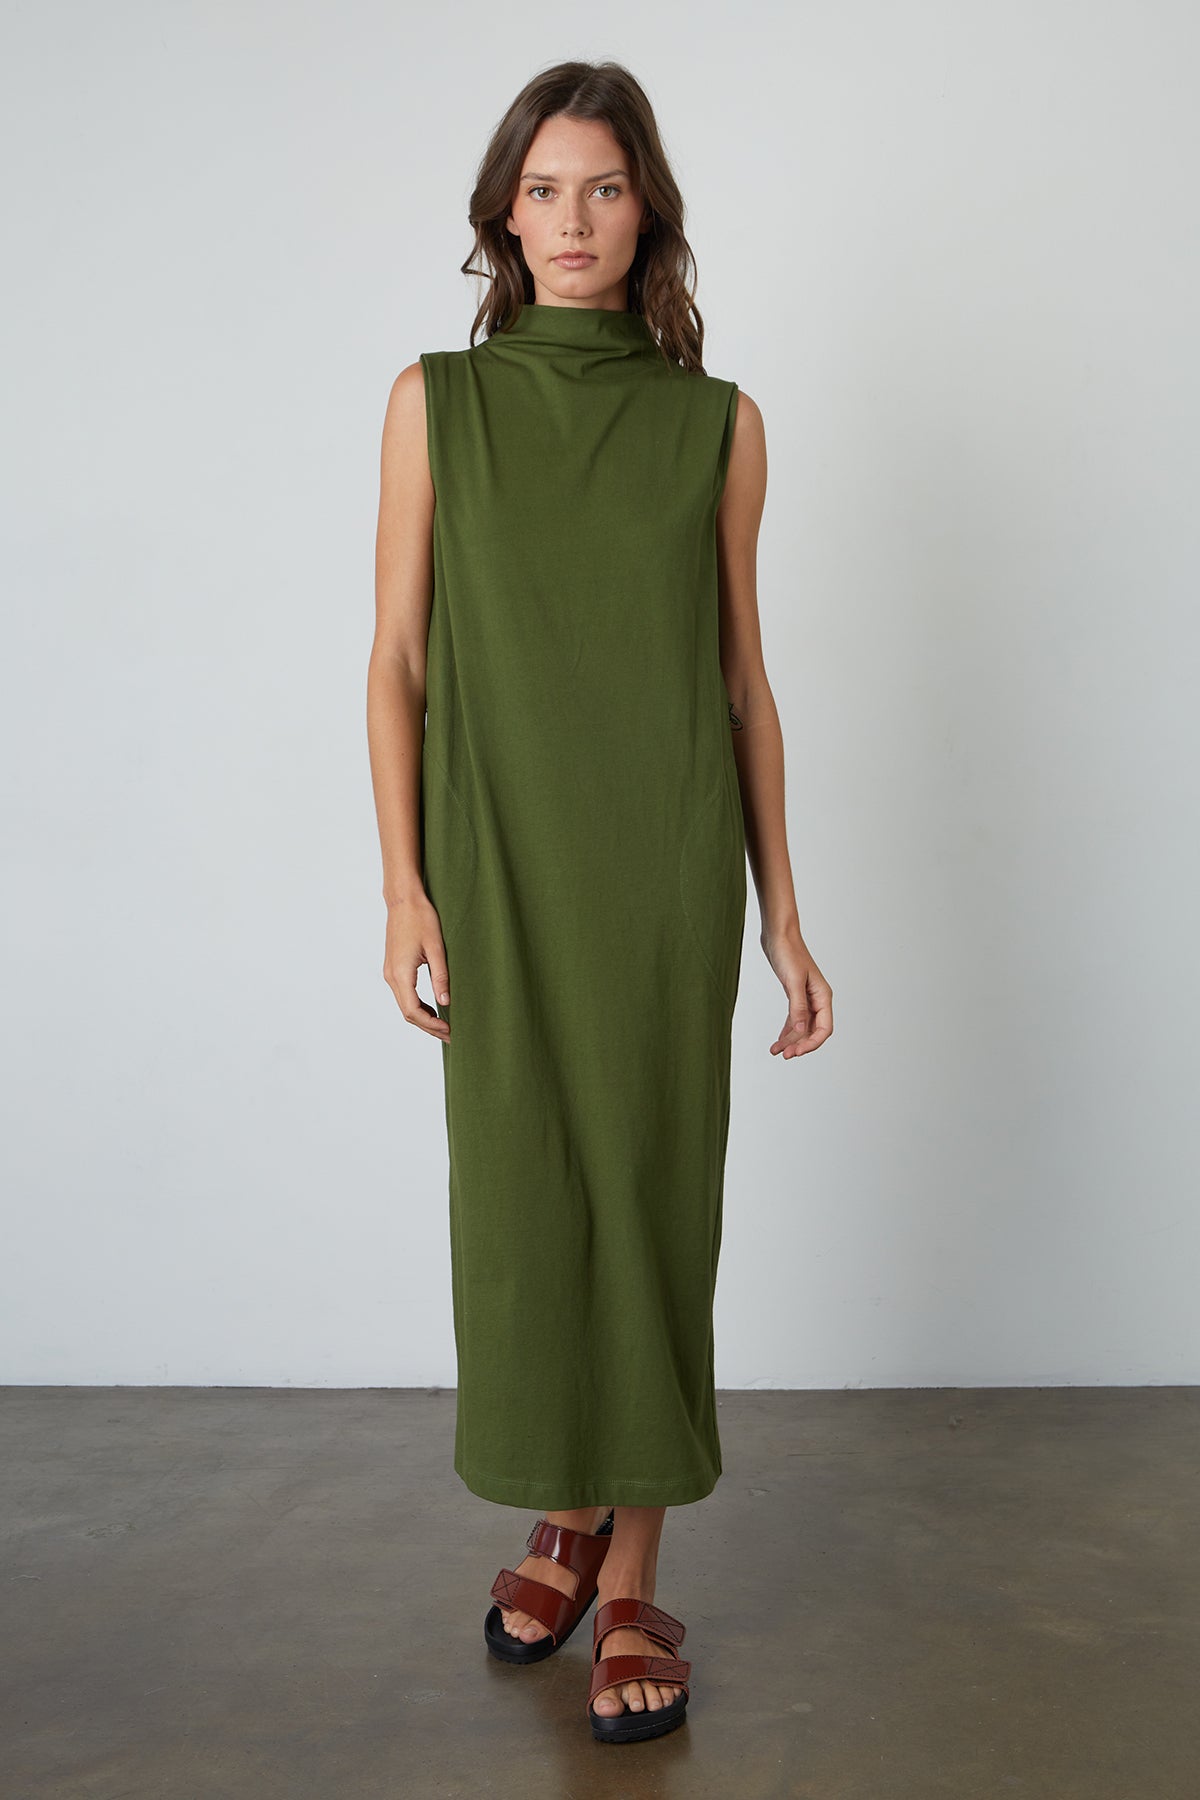   Hydie Mock Neck Dress Structured Cotton in Evergreen front view 2 